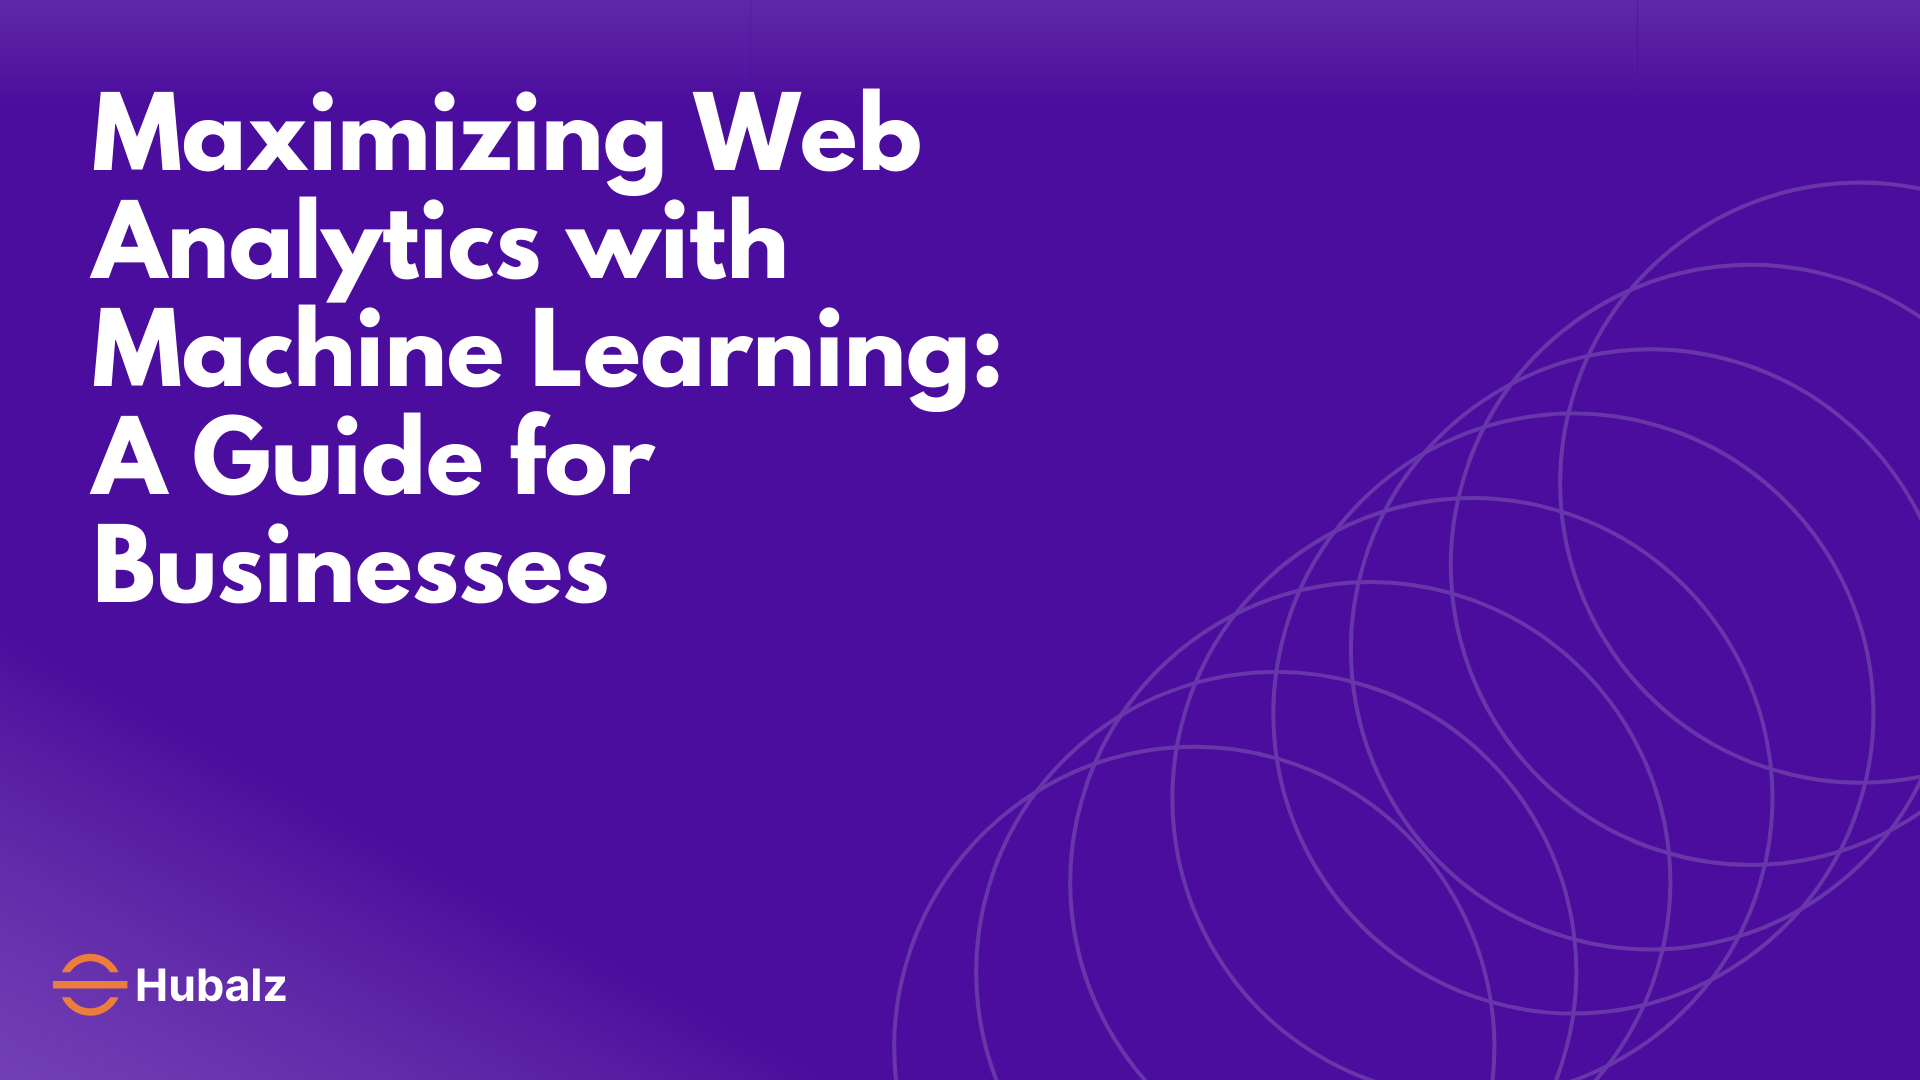 Maximizing Web Analytics with Machine Learning: A Guide for Businesses